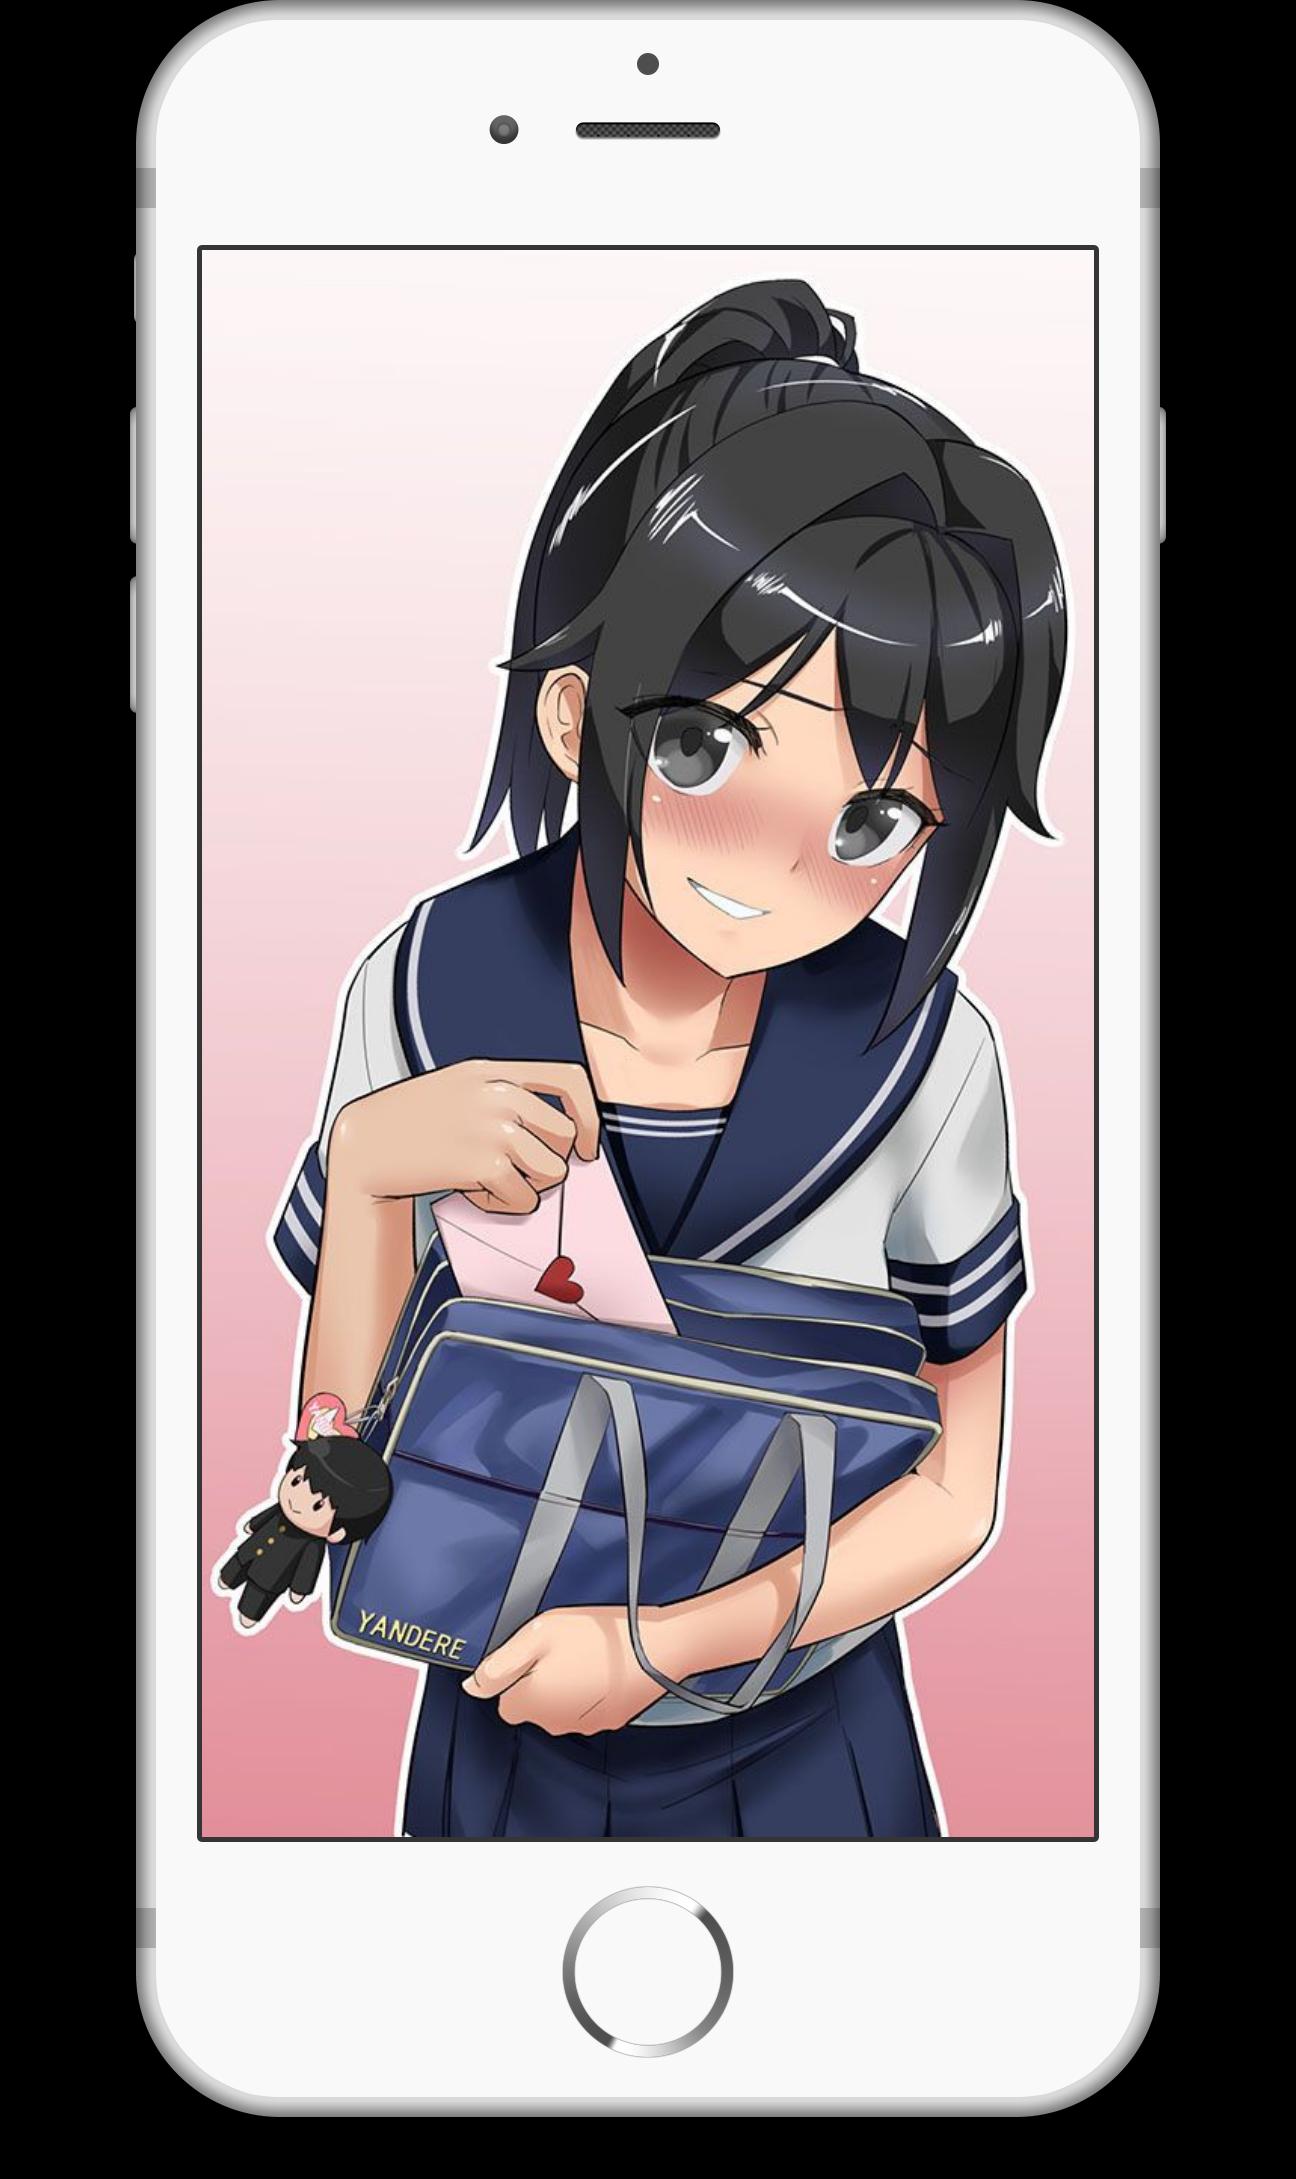 Yandere Simulator Anime Girl Wallpapers 4K HD for Android ...